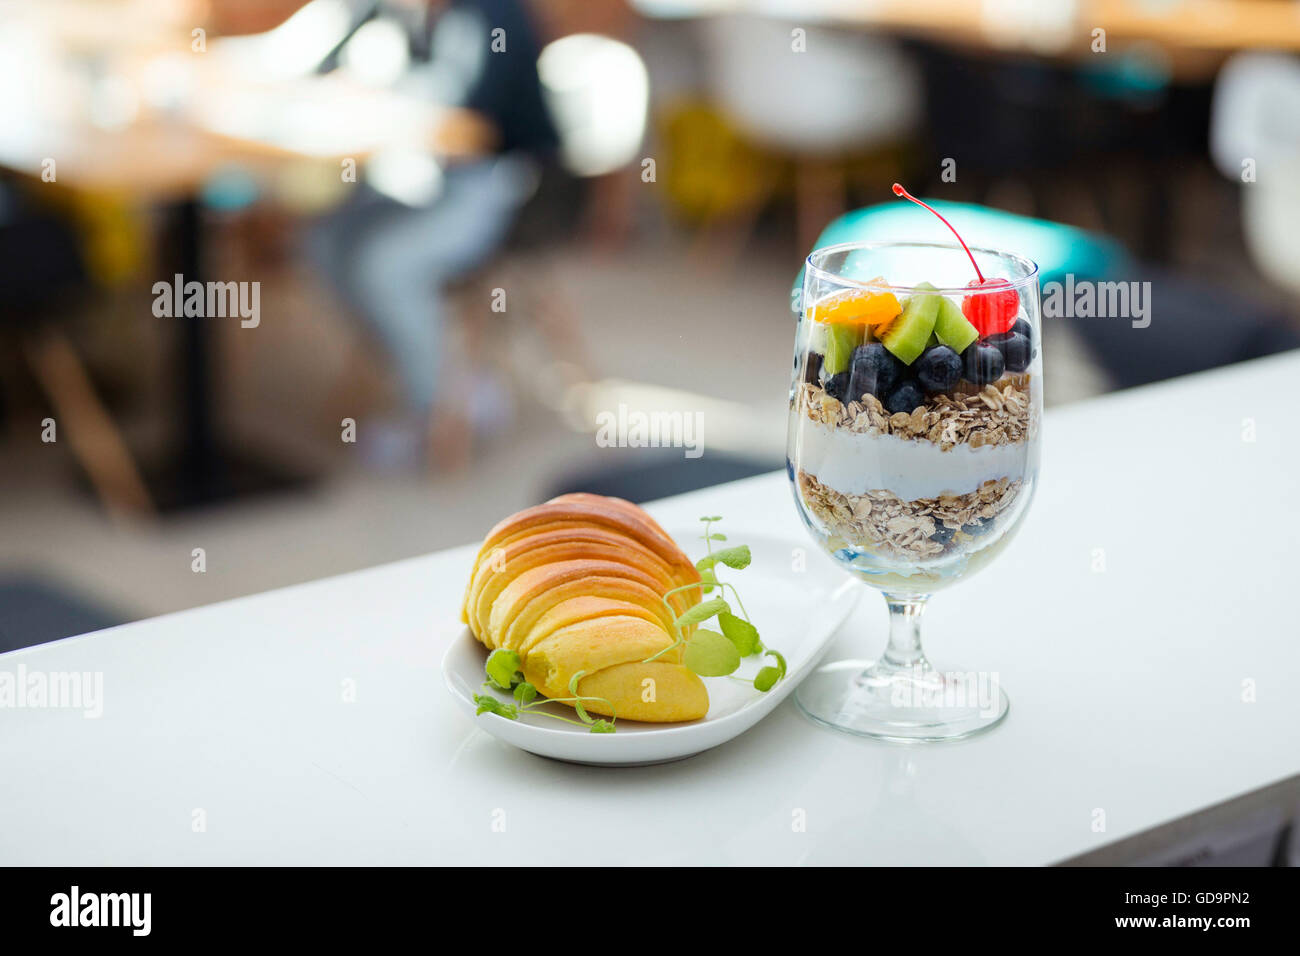 Healthy fruit cereal and croissant breakfast in modern hotel restaurant. Blurred background. Stock Photo